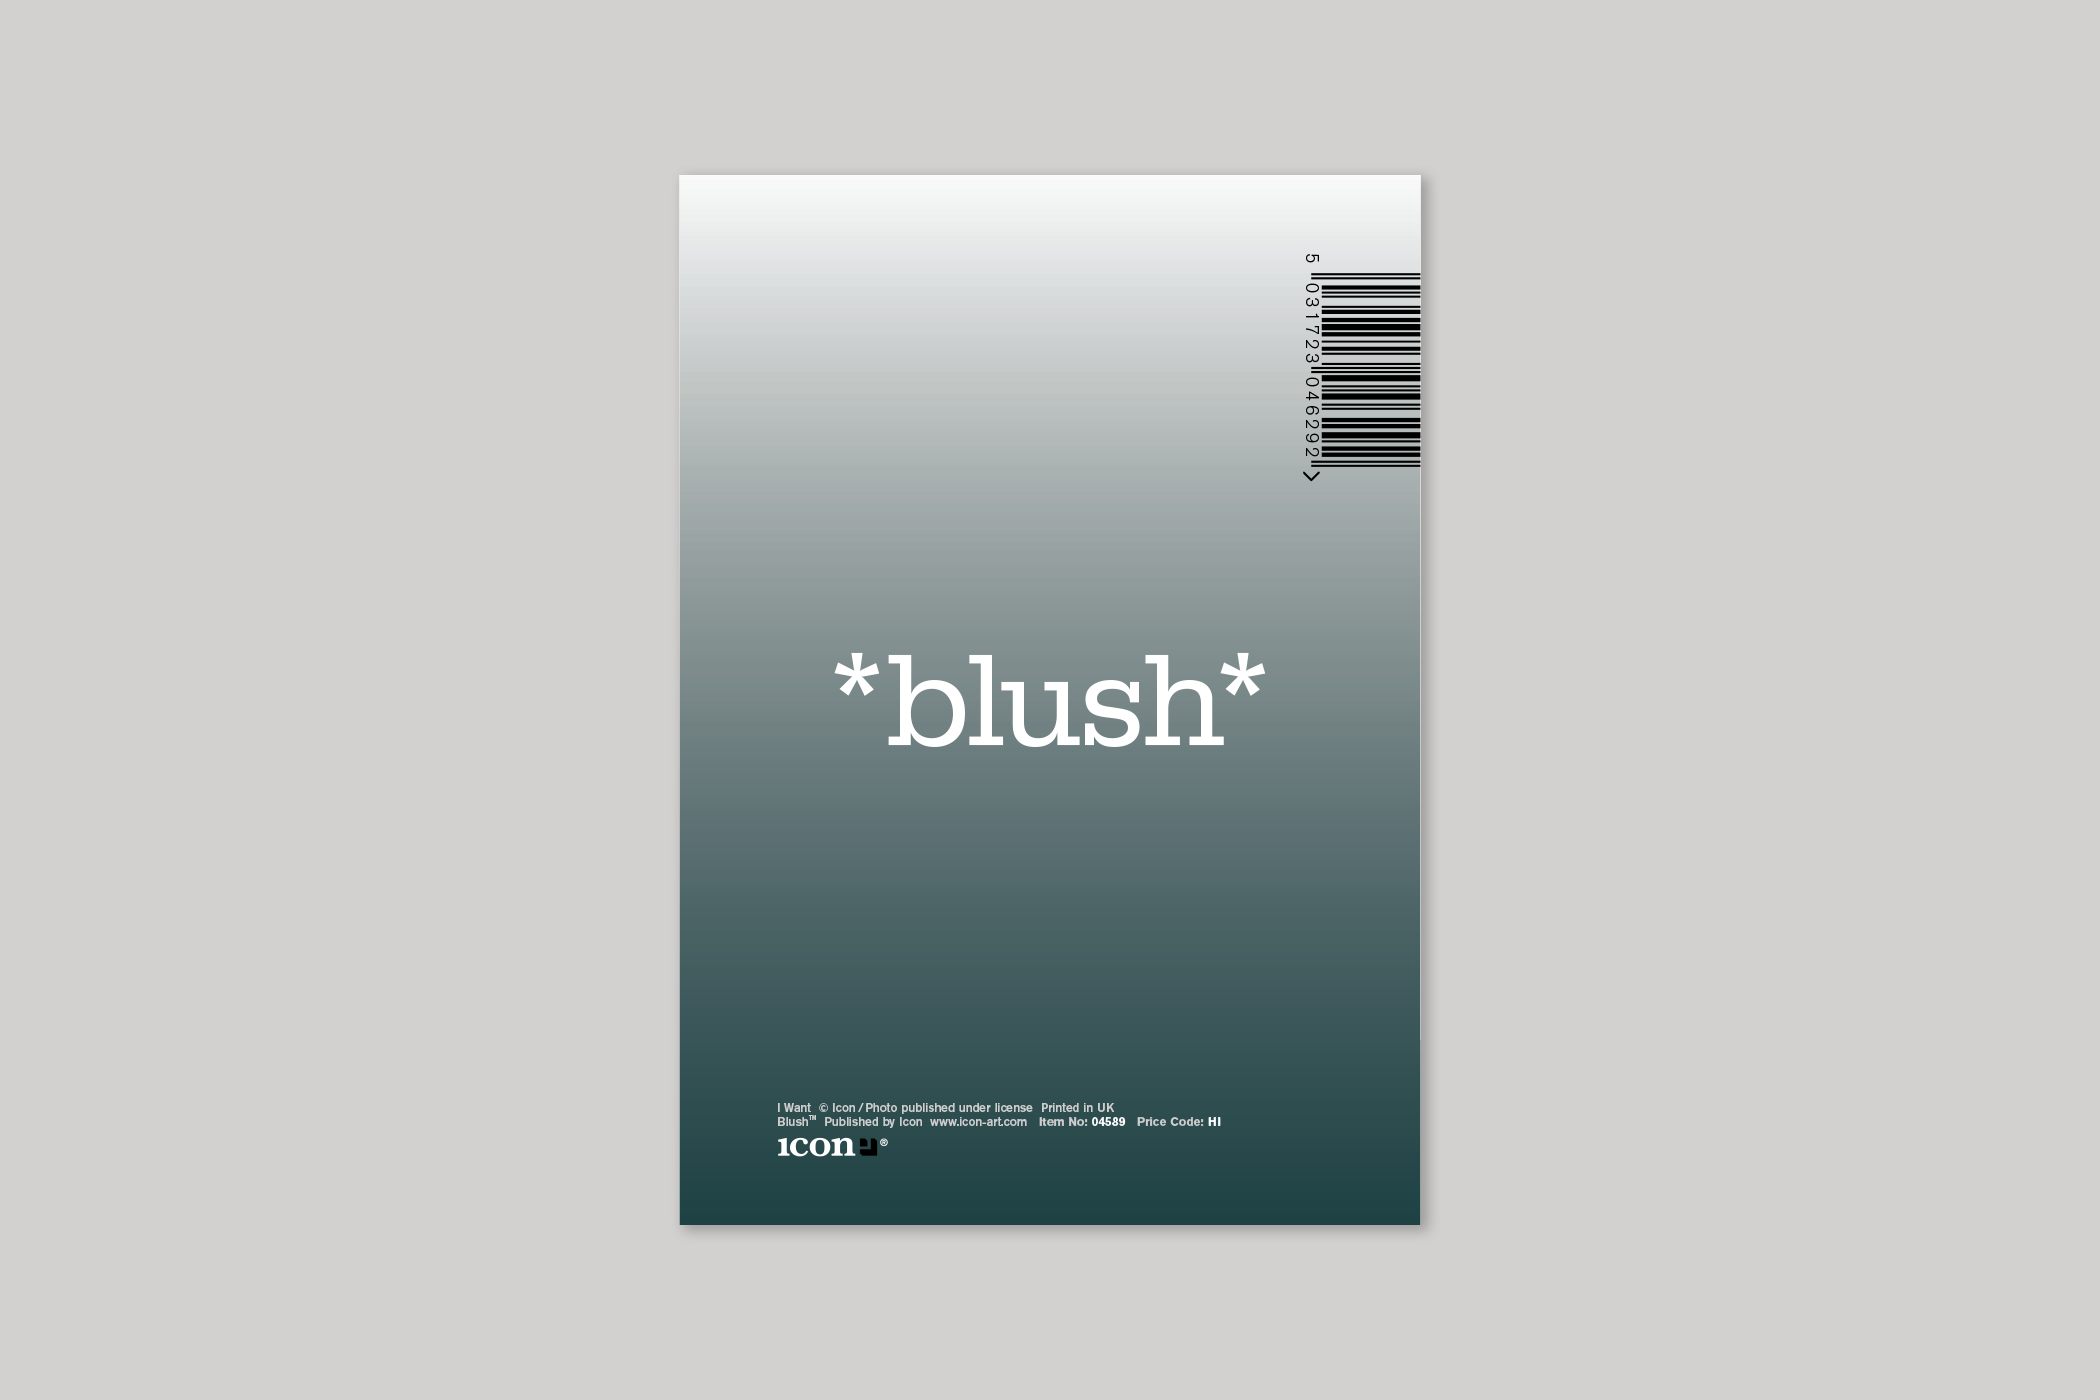 I Want from Blush humour range of greeting cards by Icon, with envelope.